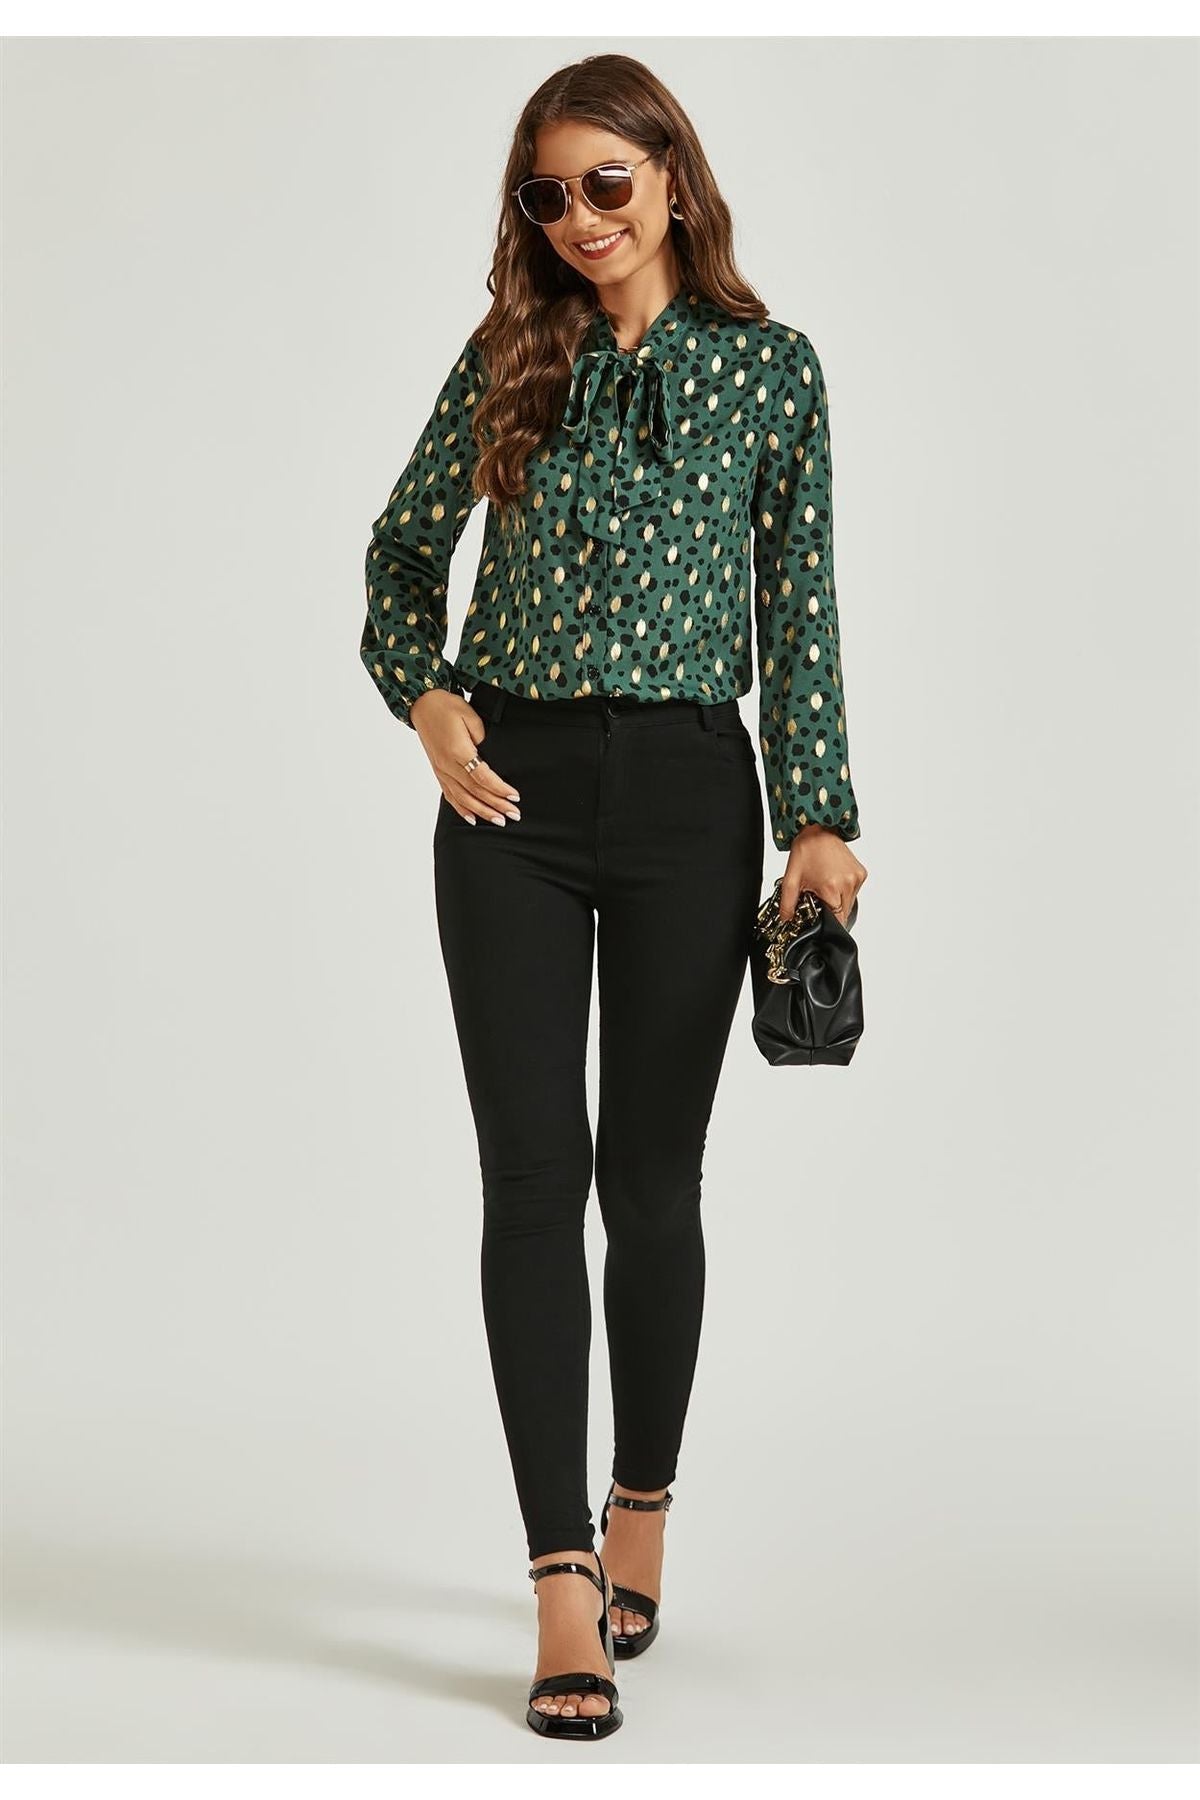 Gold Foil Leopard Print Pussybow Blouse Top In Green FS494